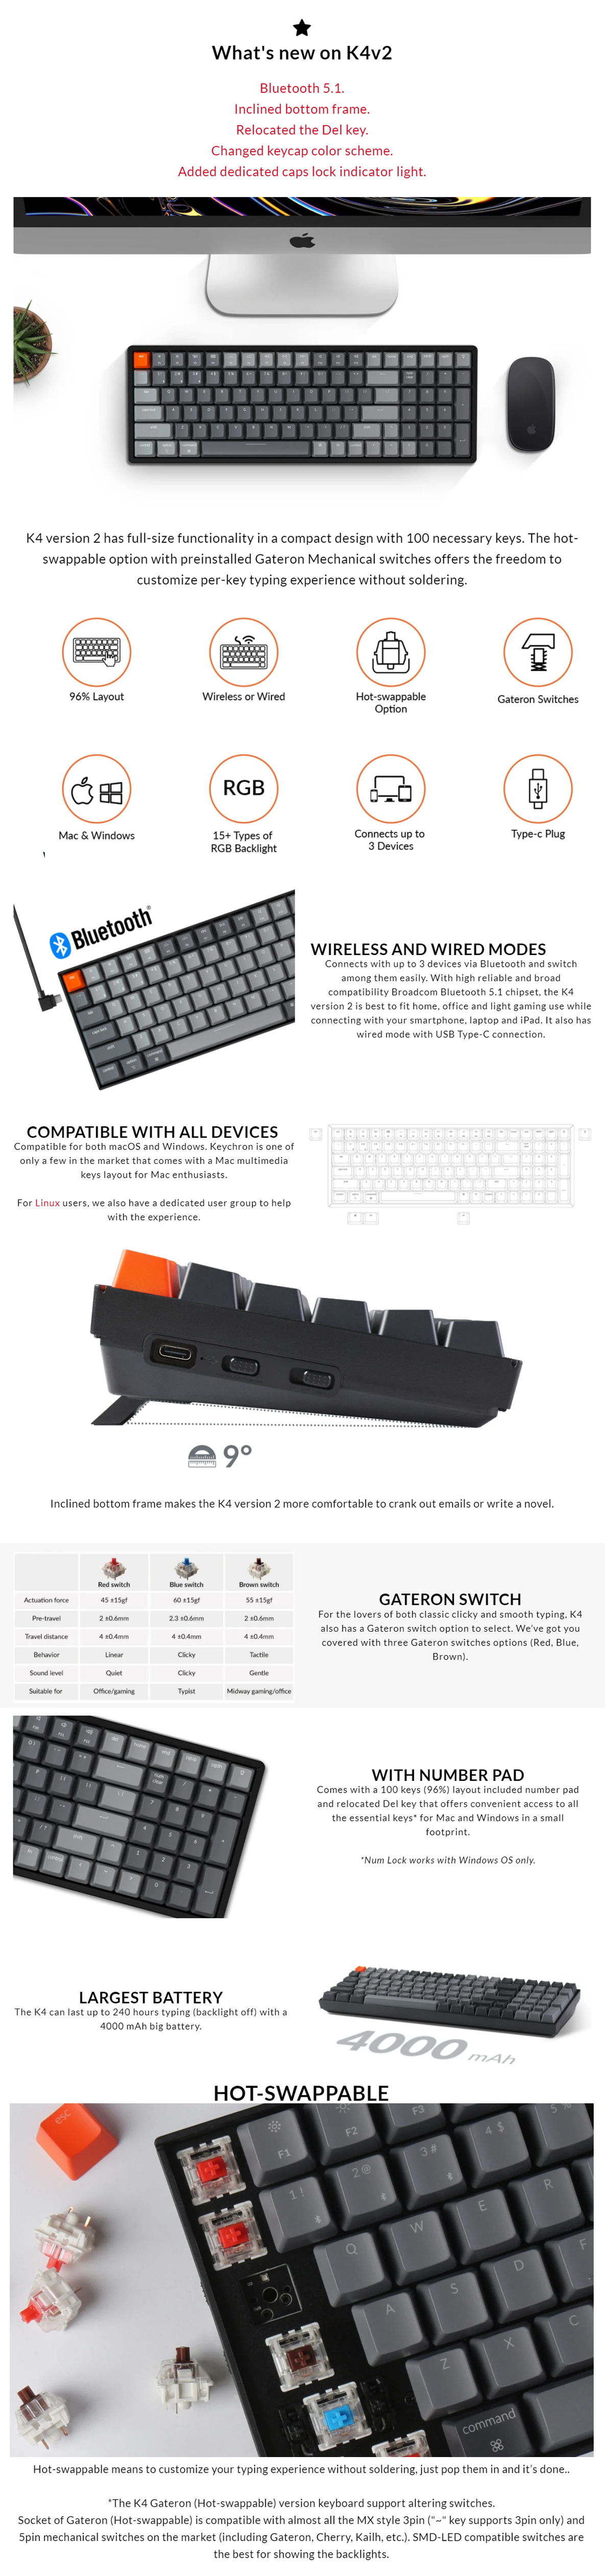 Keyboards-Keychron-K4v2-RGB-Aluminum-Frame-Wireless-Wired-Compact-Mechanical-Keyboard-Brown-Switch-3